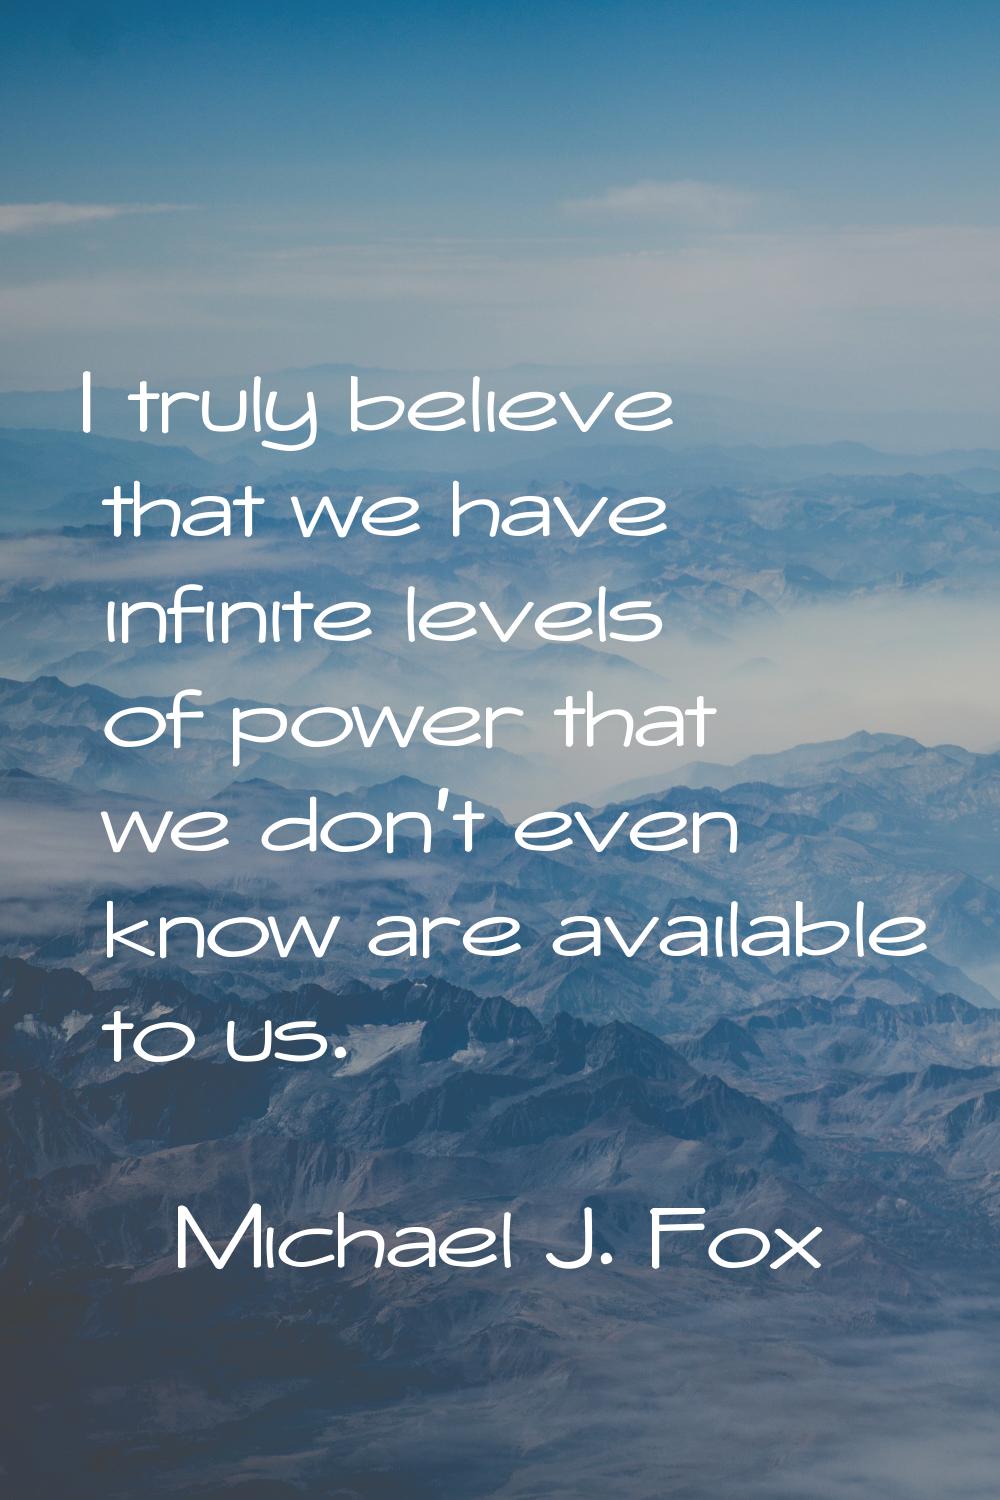 I truly believe that we have infinite levels of power that we don't even know are available to us.